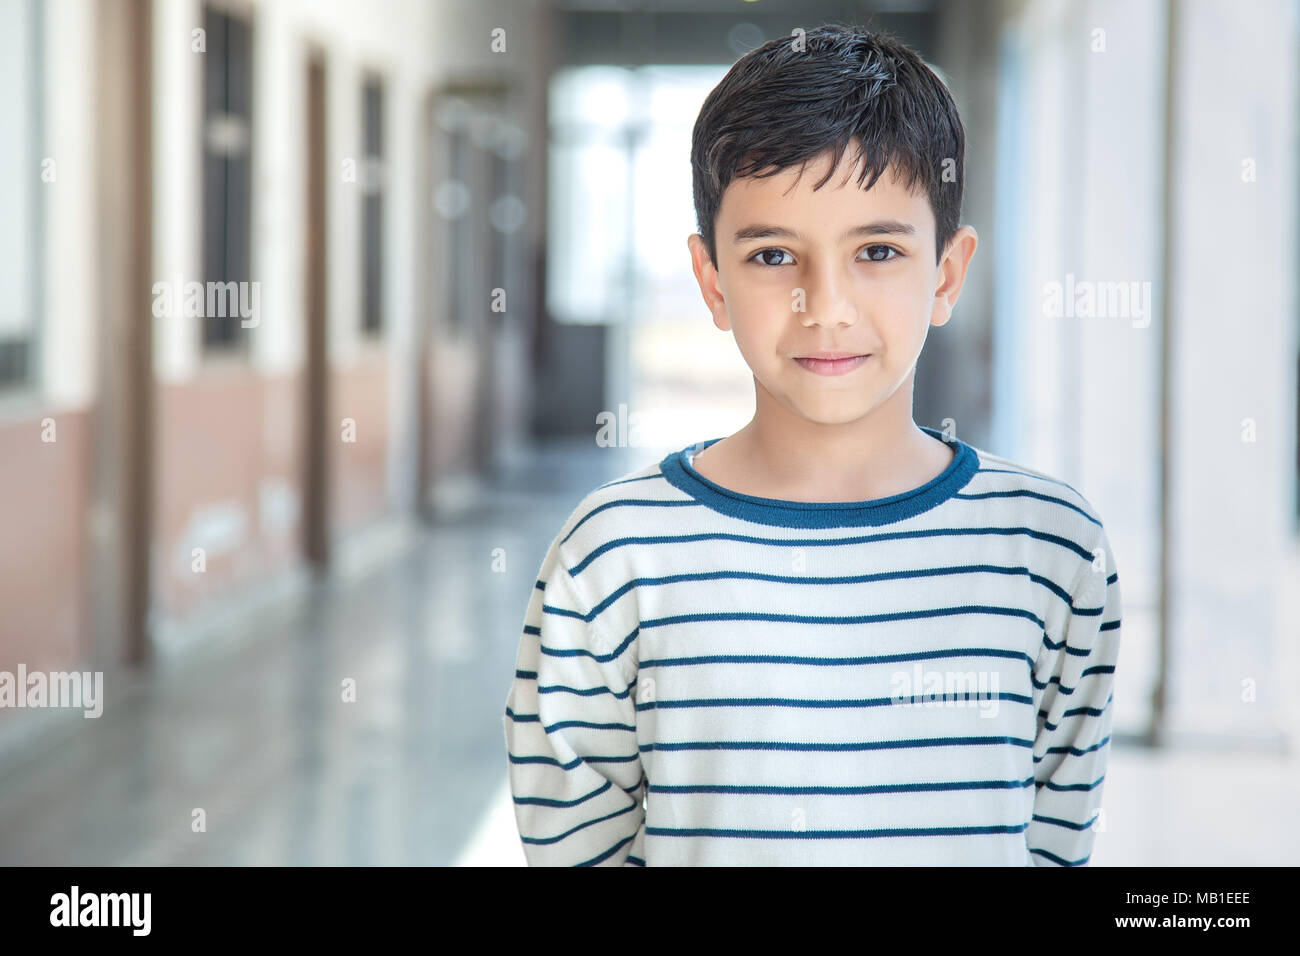 Portrait of smiling 6-7 years Indian kid, standing straight at school campus in school uniform and looking at camera Stock Photo